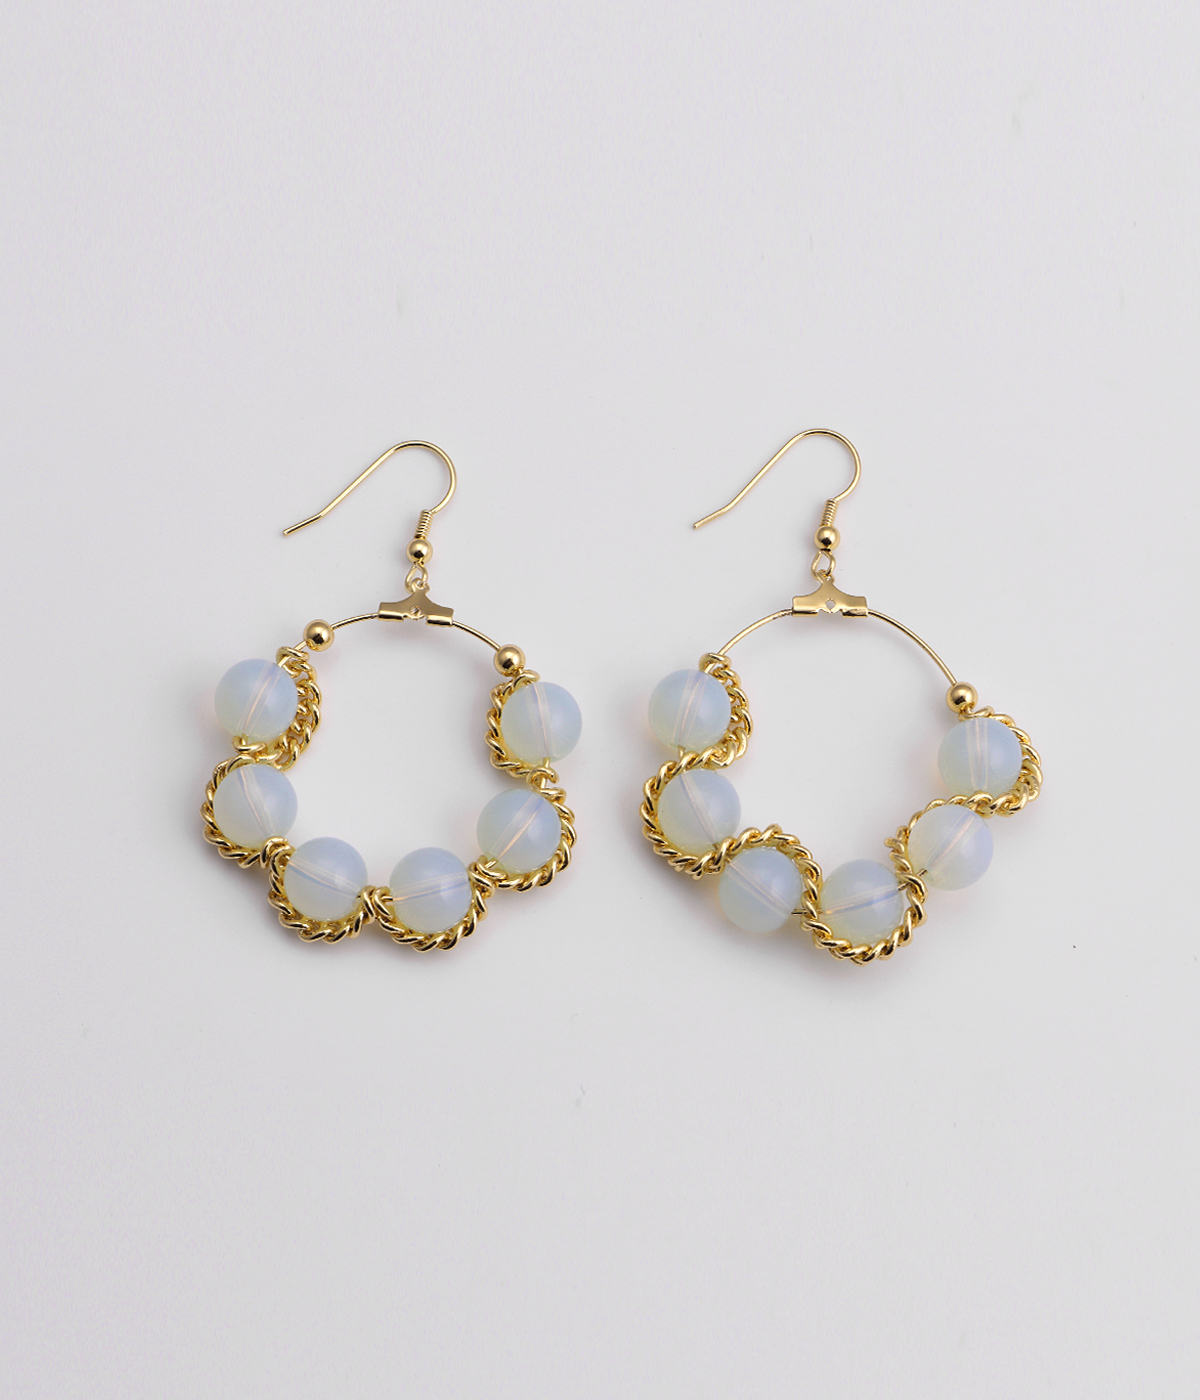 Moonstone Crystal Beads Earrings Wrapped In Gold Chain  -latest EARRING,Drop & Dangle design 2021